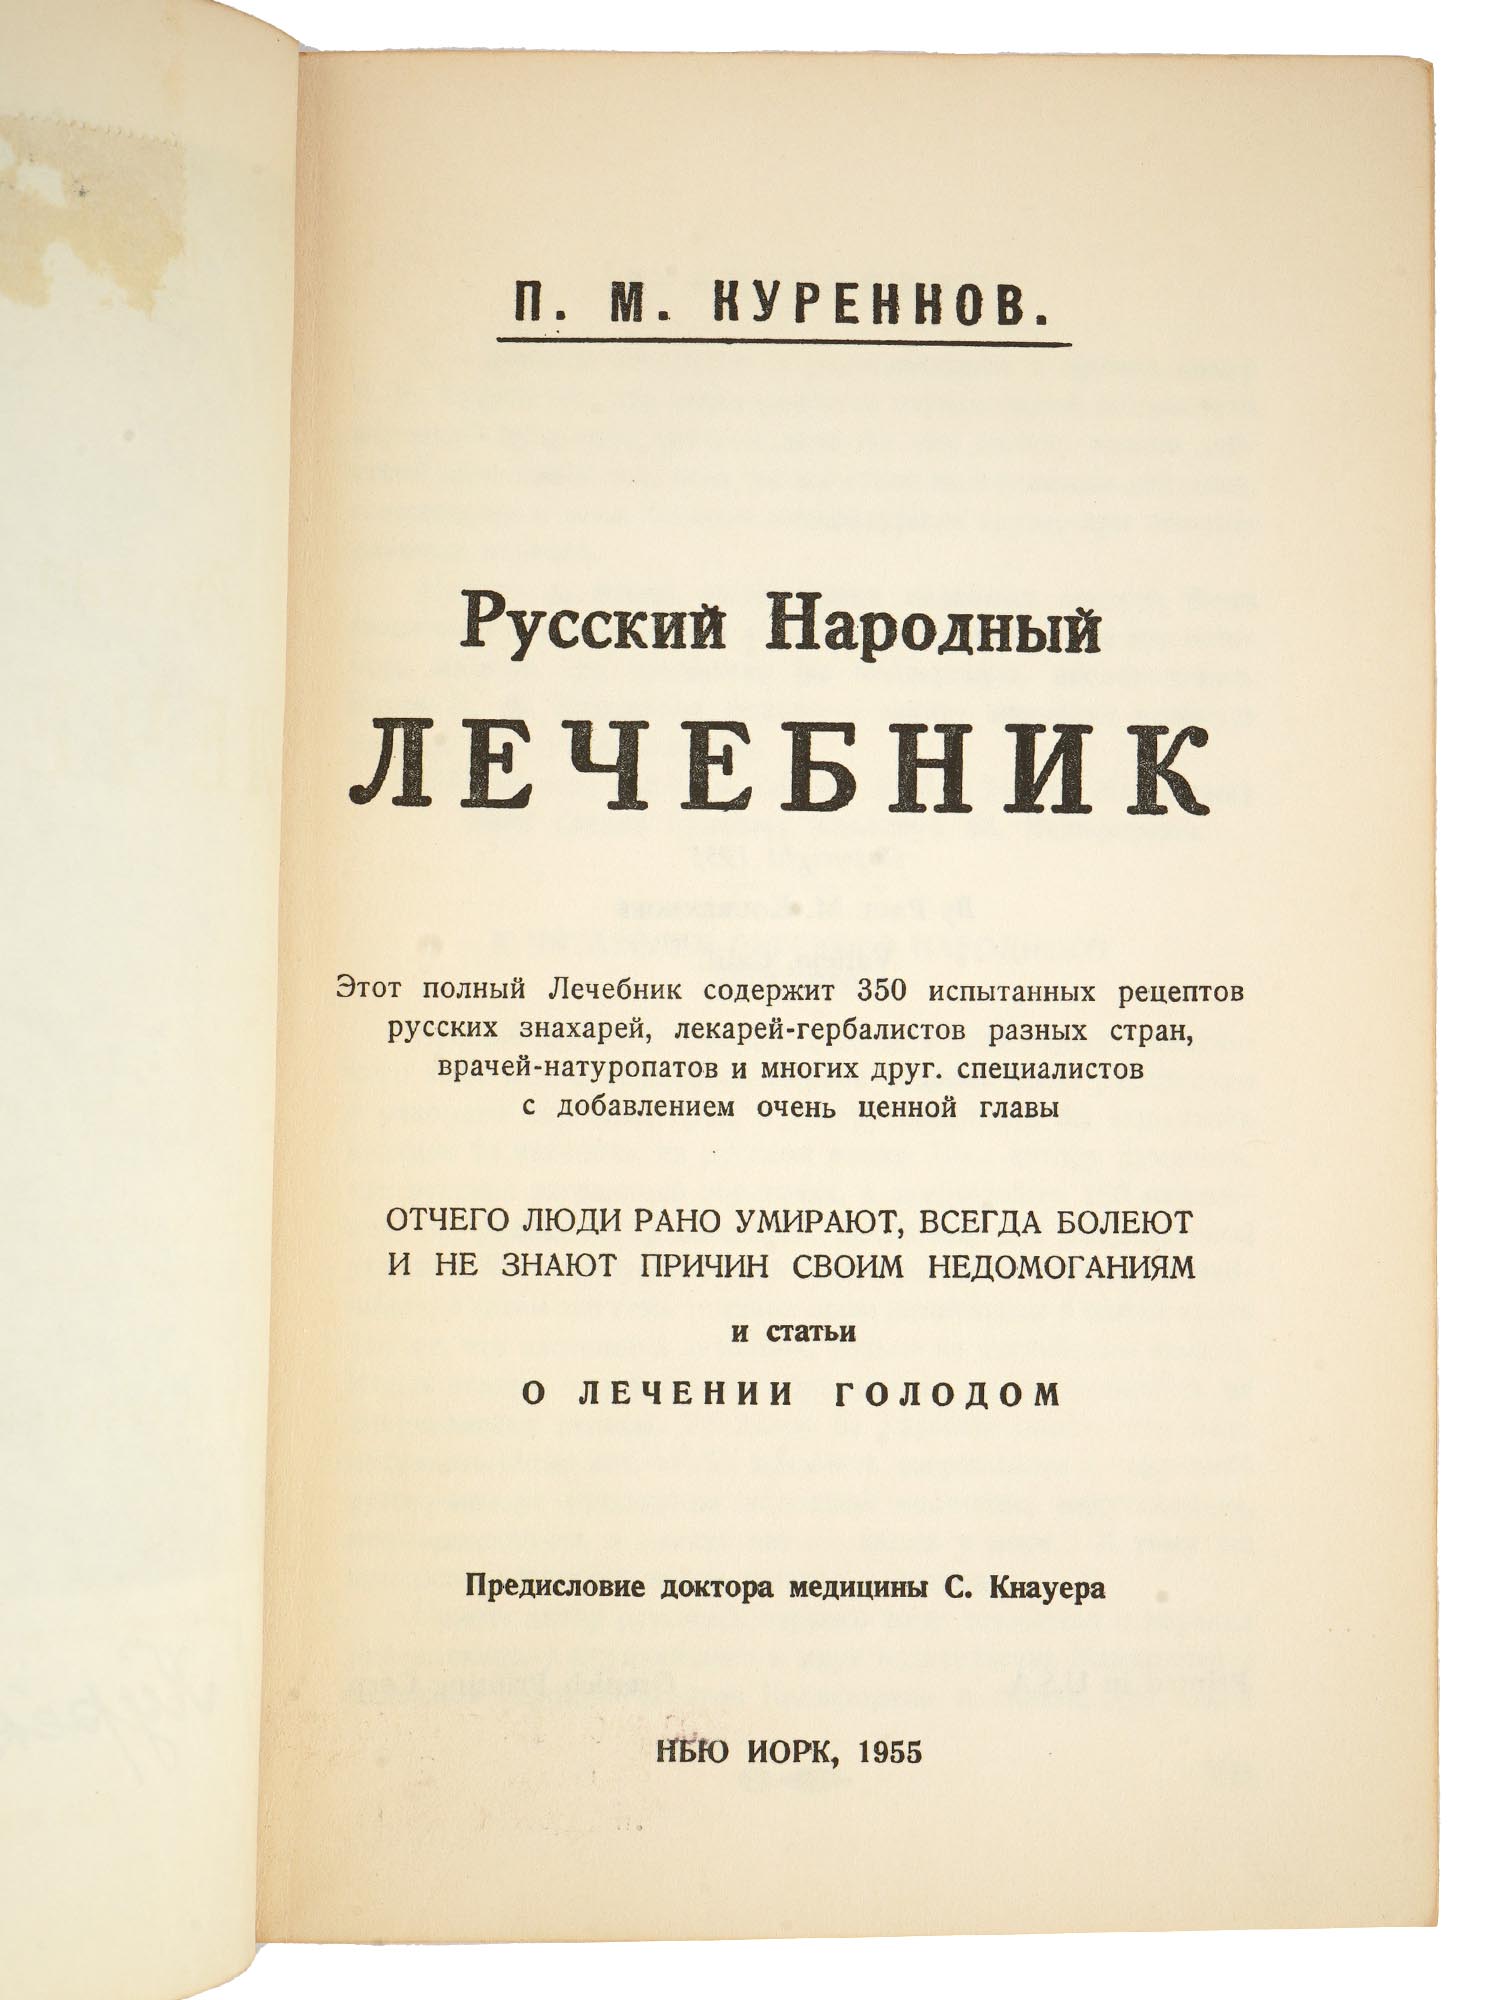 VINTAGE RUSSIAN BOOKS OF TRADITIONAL MEDICINE PIC-9